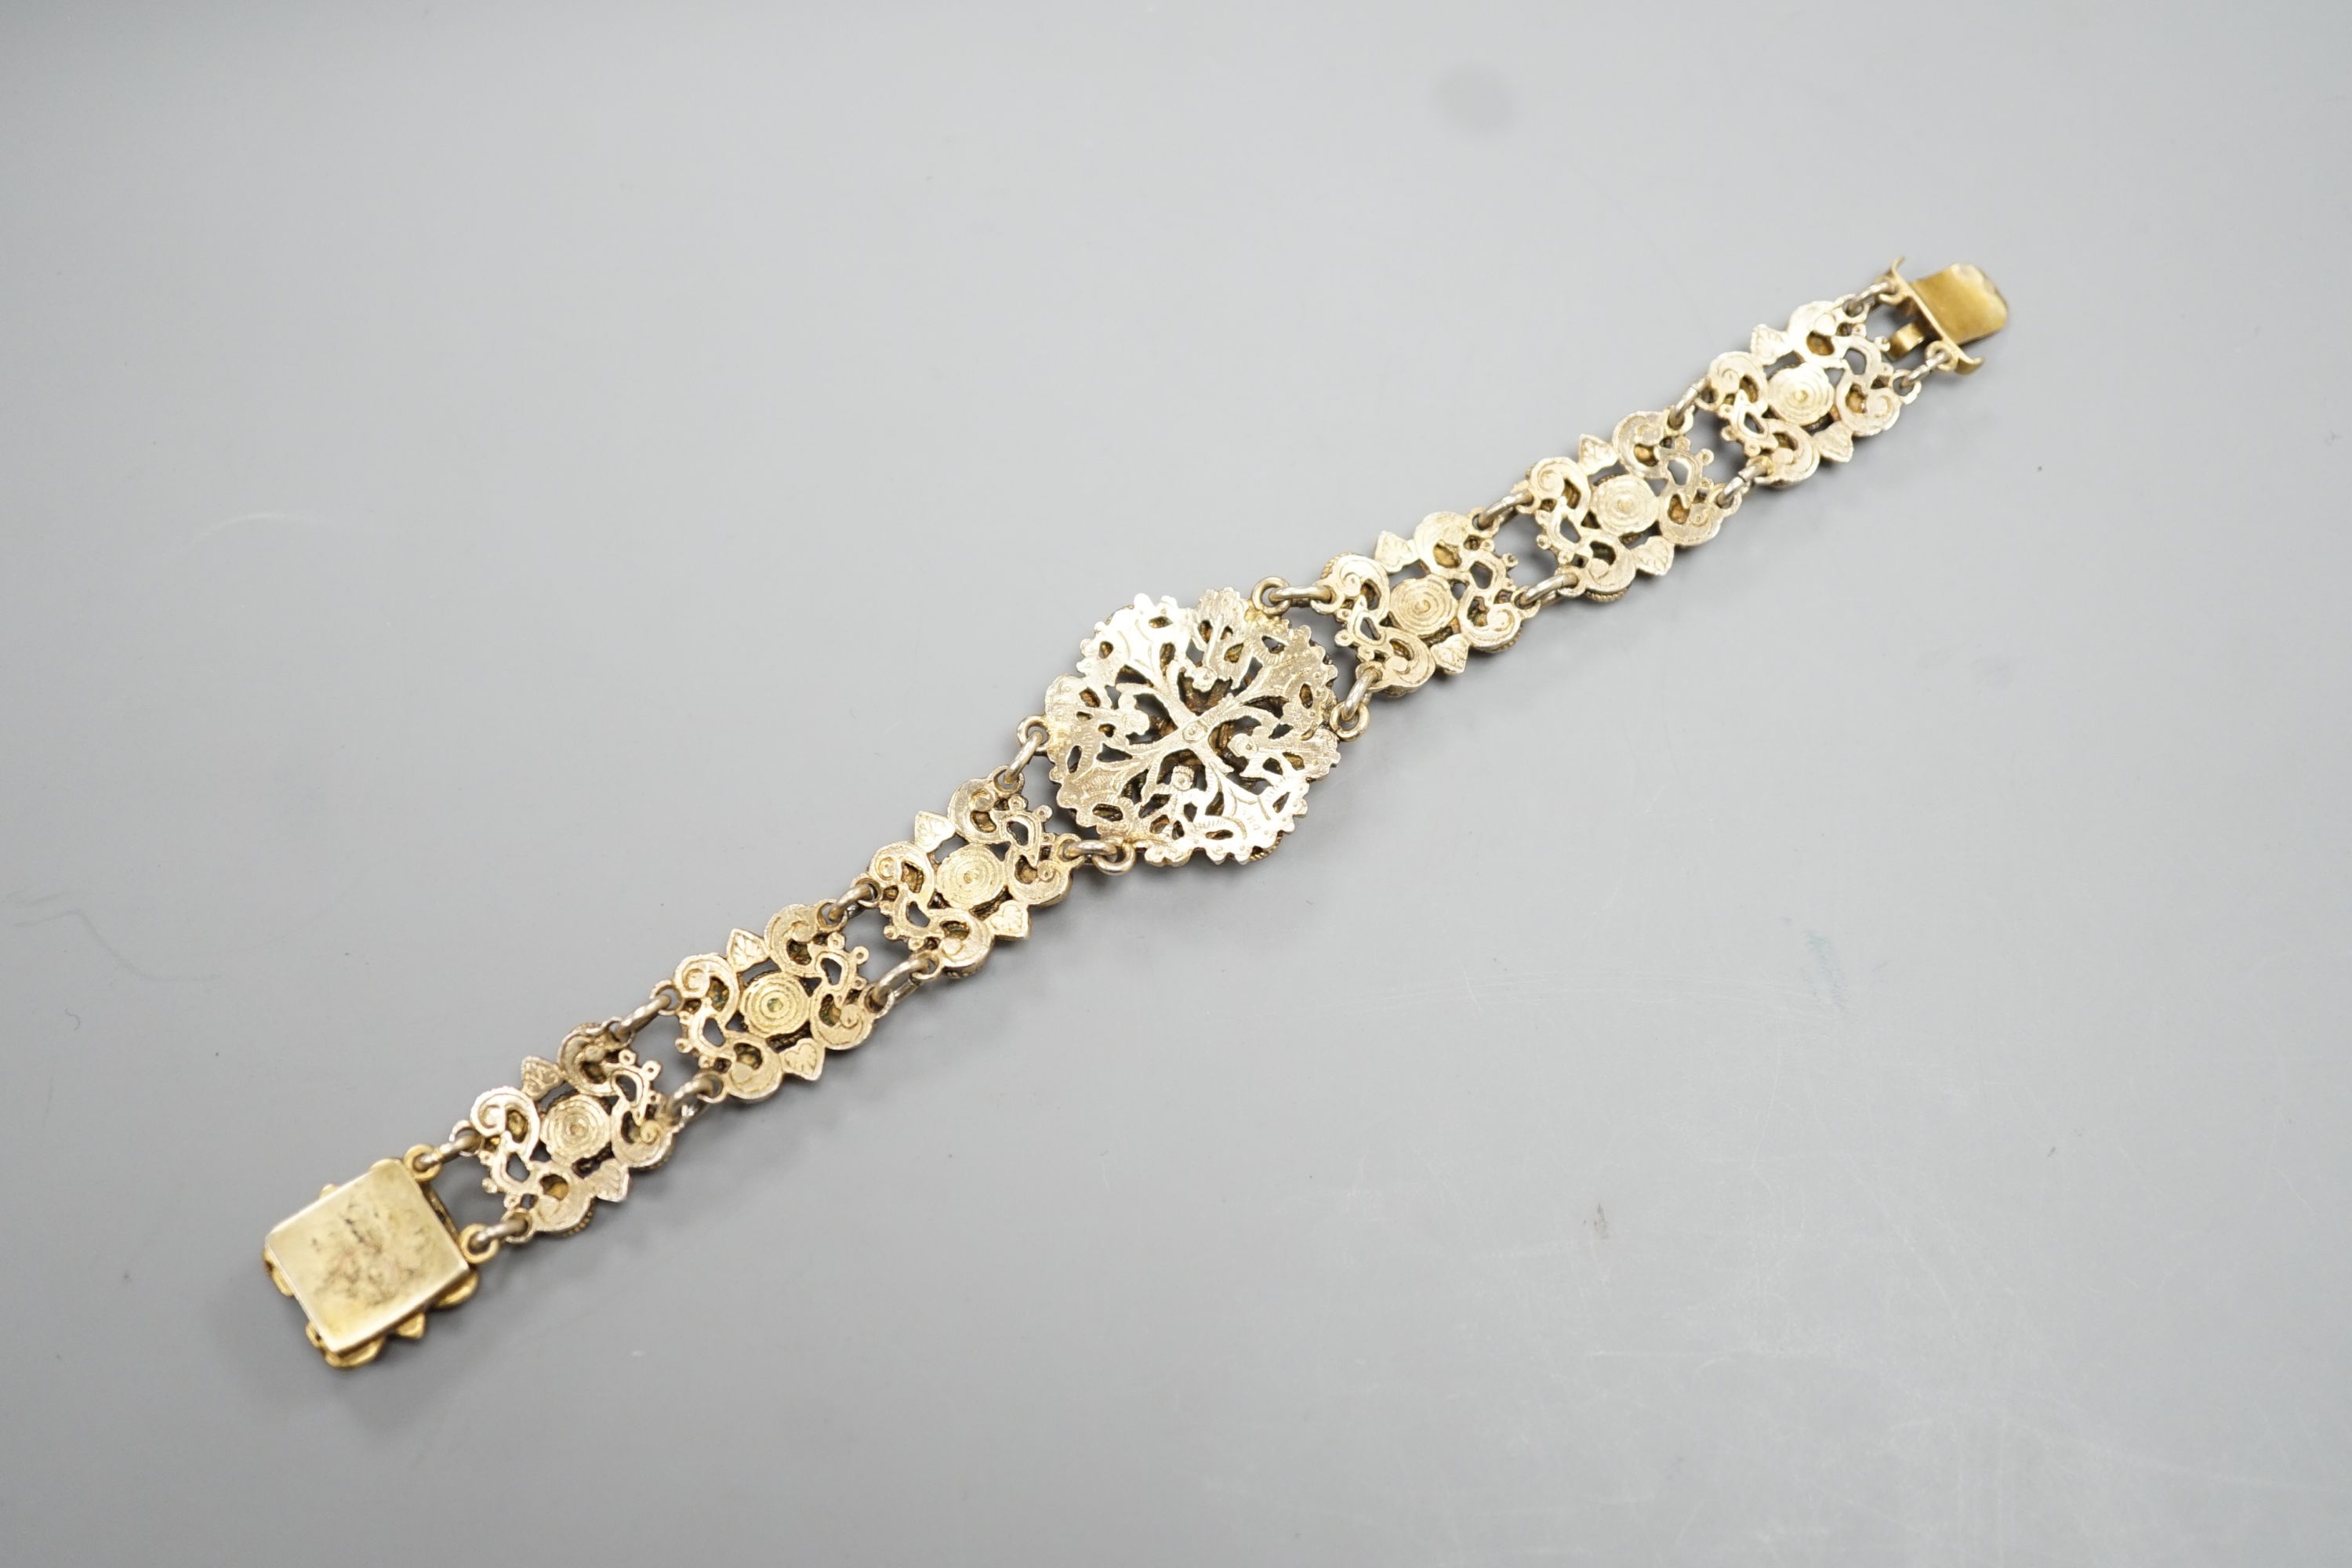 A late 19th/early 20th century Austro-Hungarian gilt white metal and blue paste set bracelet, 15.8cm.